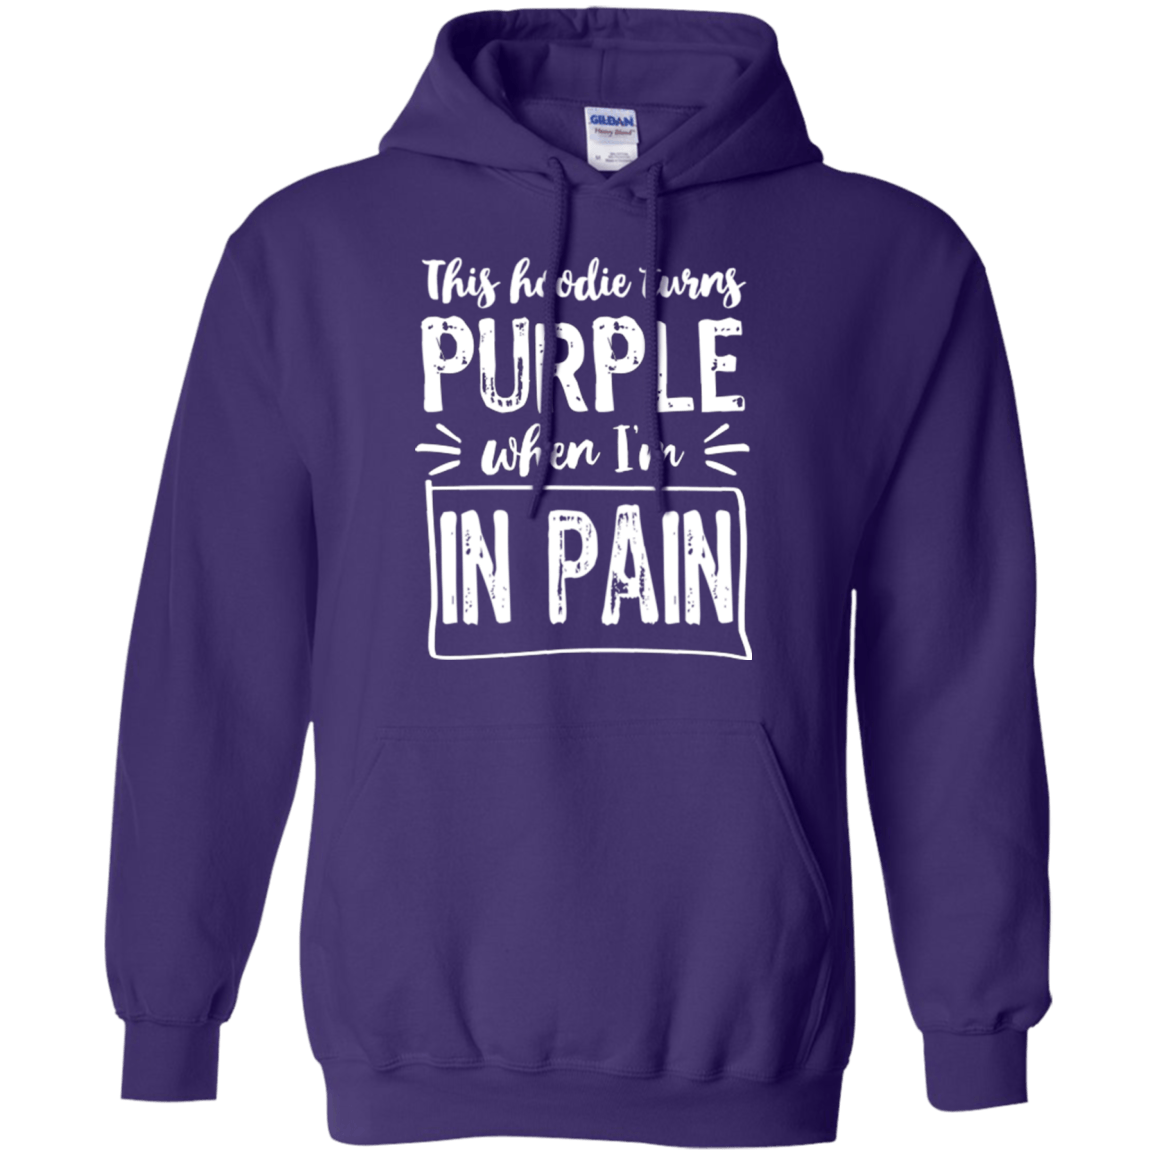 Hoodie Turns Purple When In Pain Pullover Hoodie 8 oz. - The Unchargeables